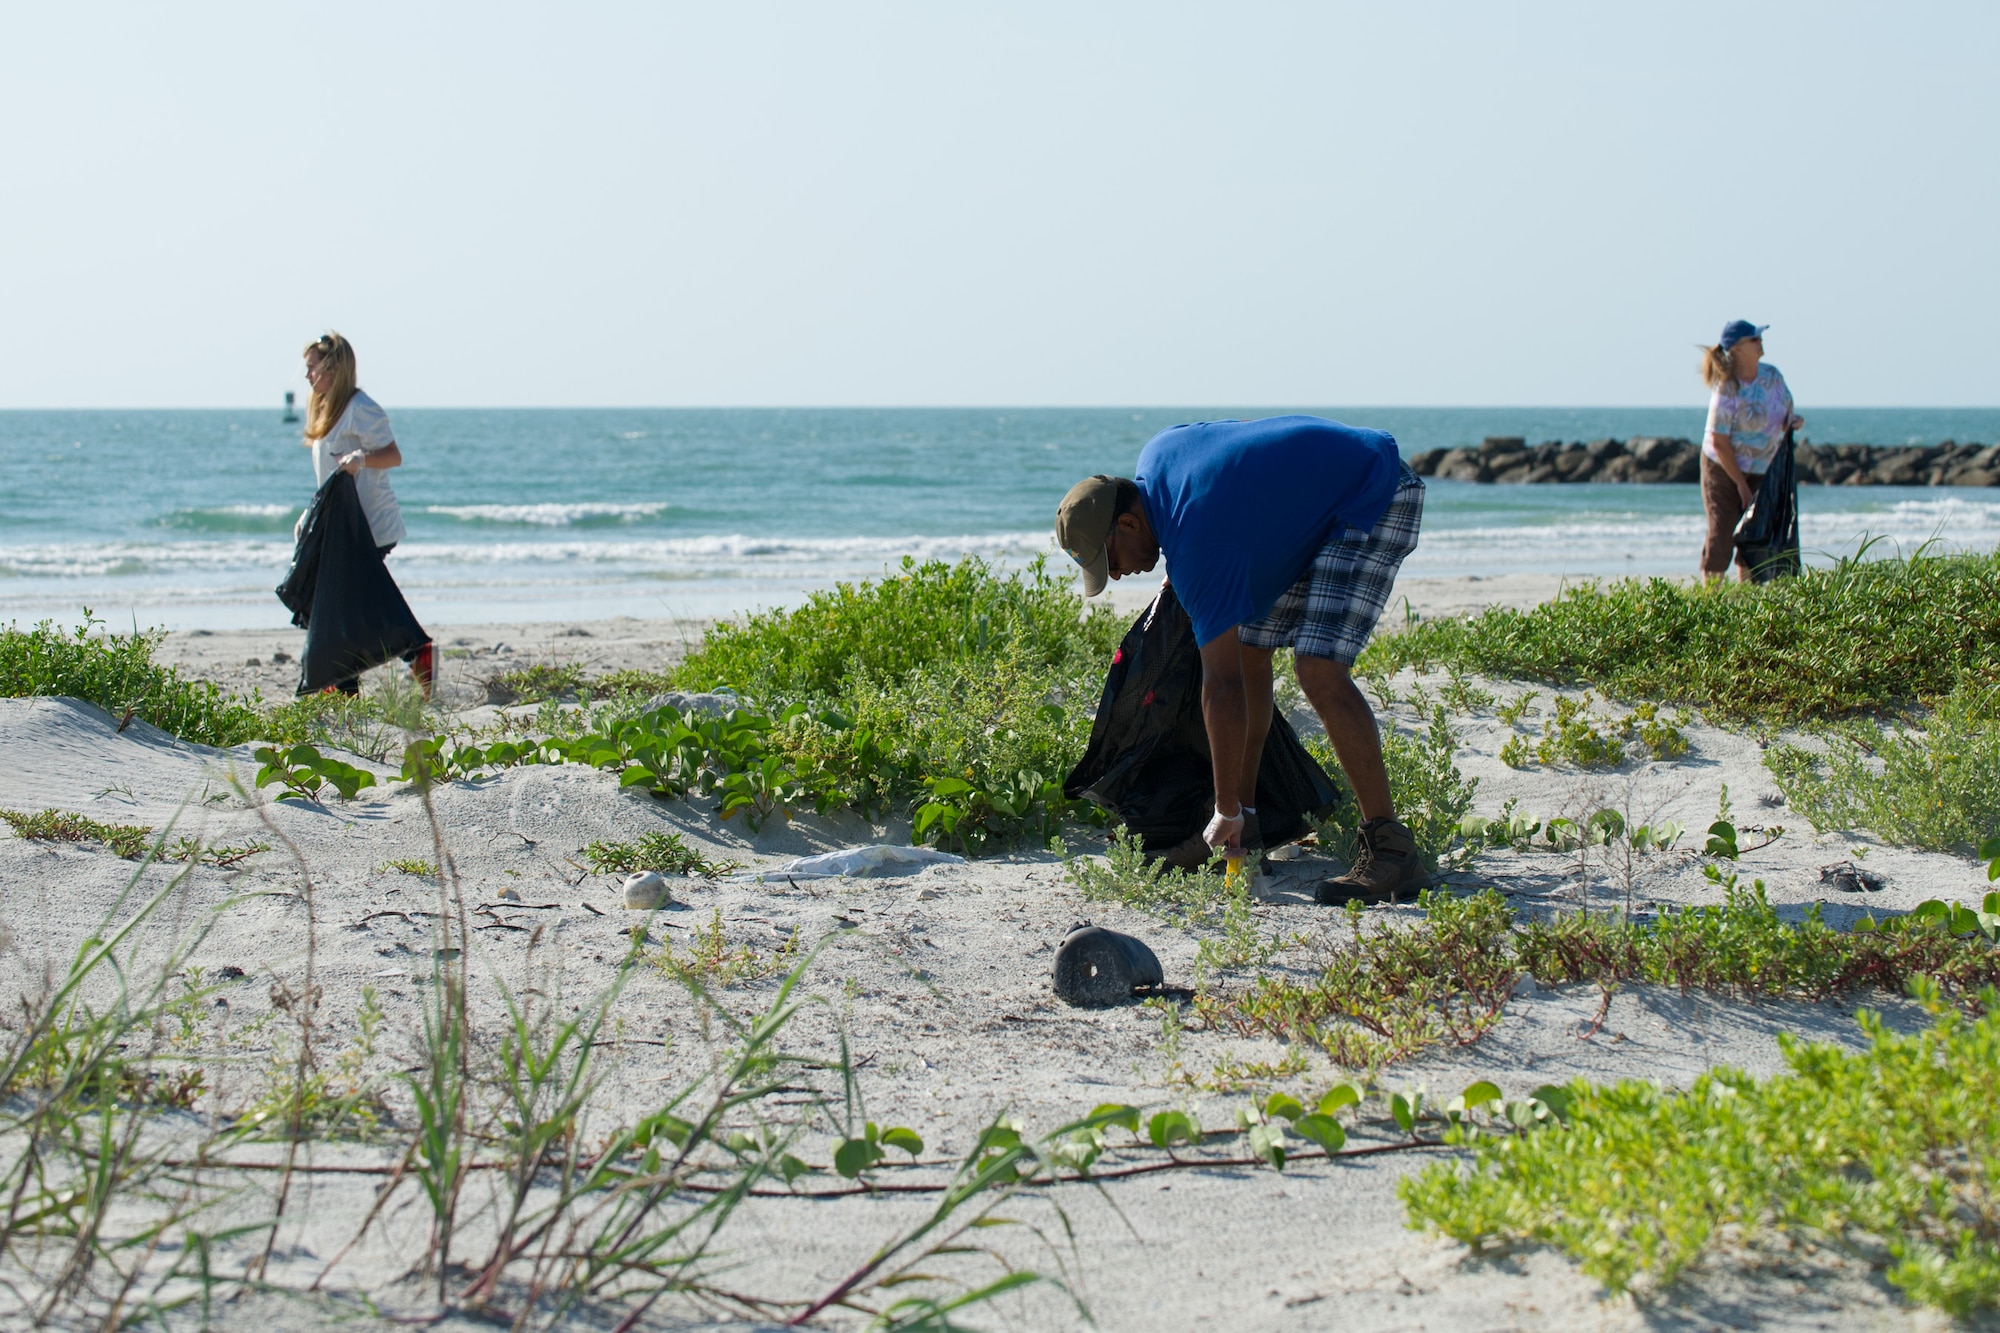 More than 60 volunteers gathered debris during the annual Spring Beach Cleanup at Cape Canaveral Air Force Station, Fla., beaches April 28, 2016. Airmen, civilians and family members spent four hours and removed approximately 5 tons of trash from the beach. The cleanup was organized by the 45th Civil Engineer Squadron environmental conservation team as part of the 45th Space Wing’s commitment to environmental stewardship. (U.S. Air Force photos/Benjamin Thacker) (Released)